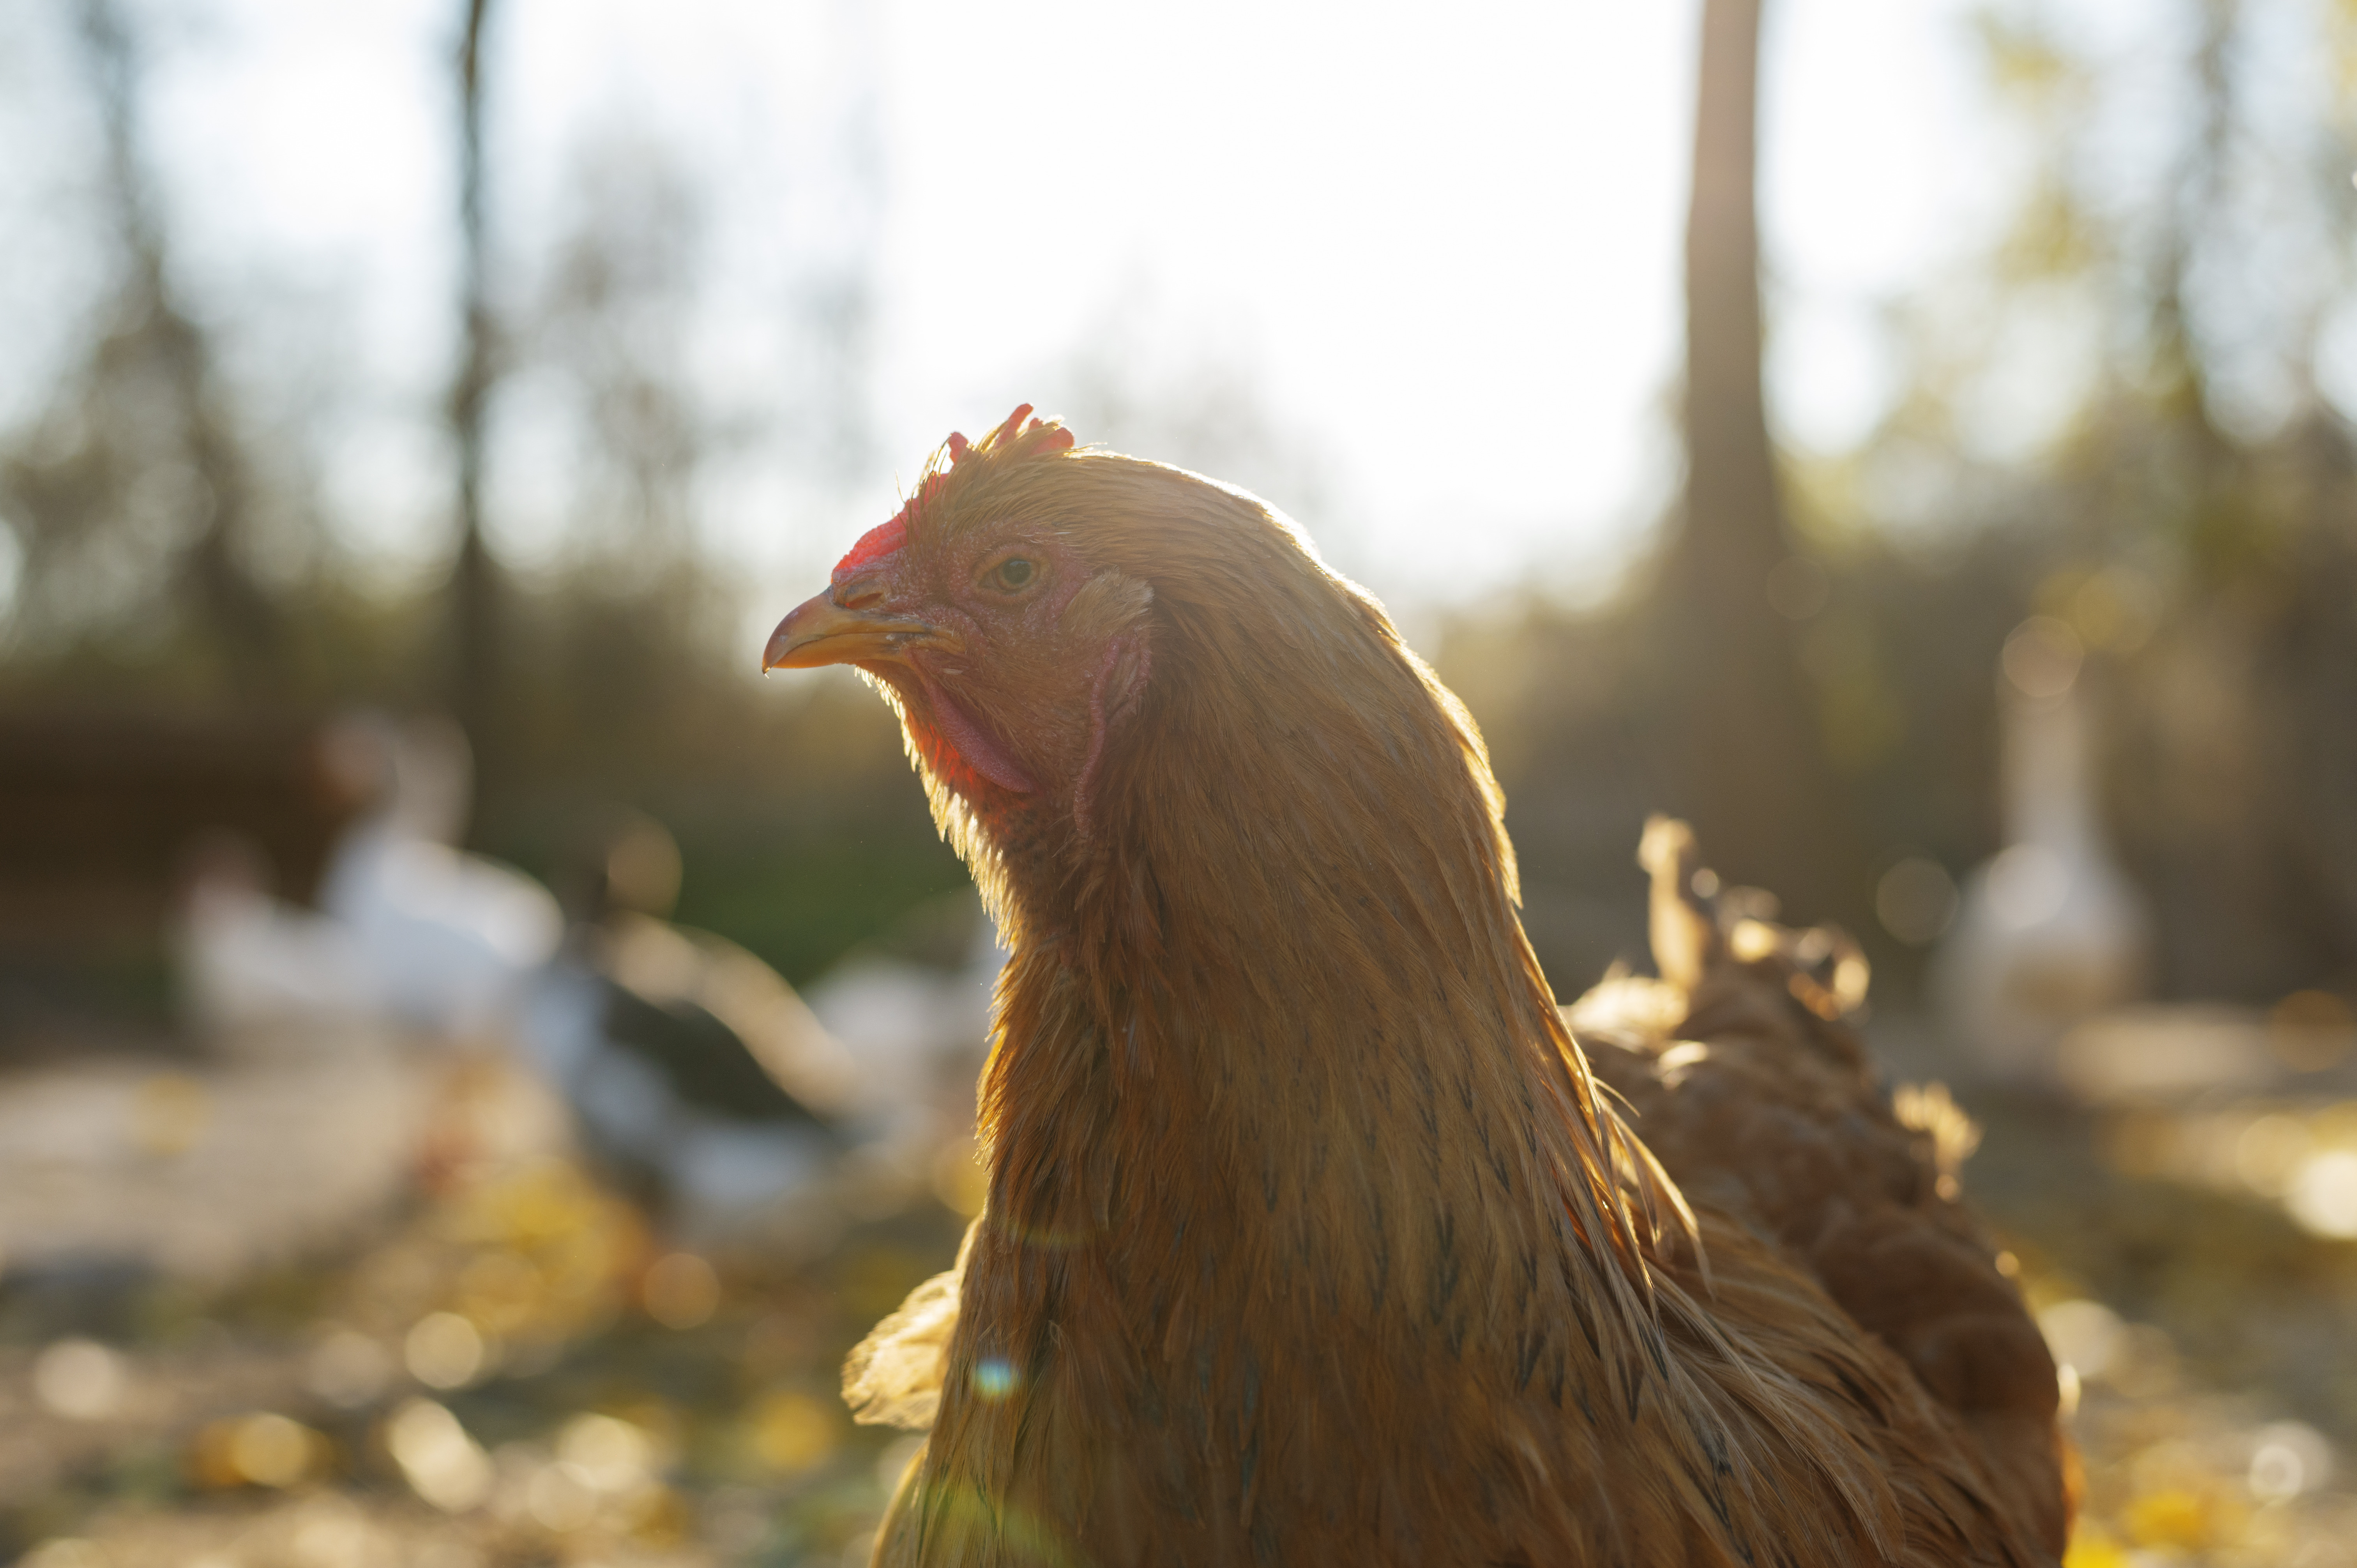 How much water do hens need to drink every day?